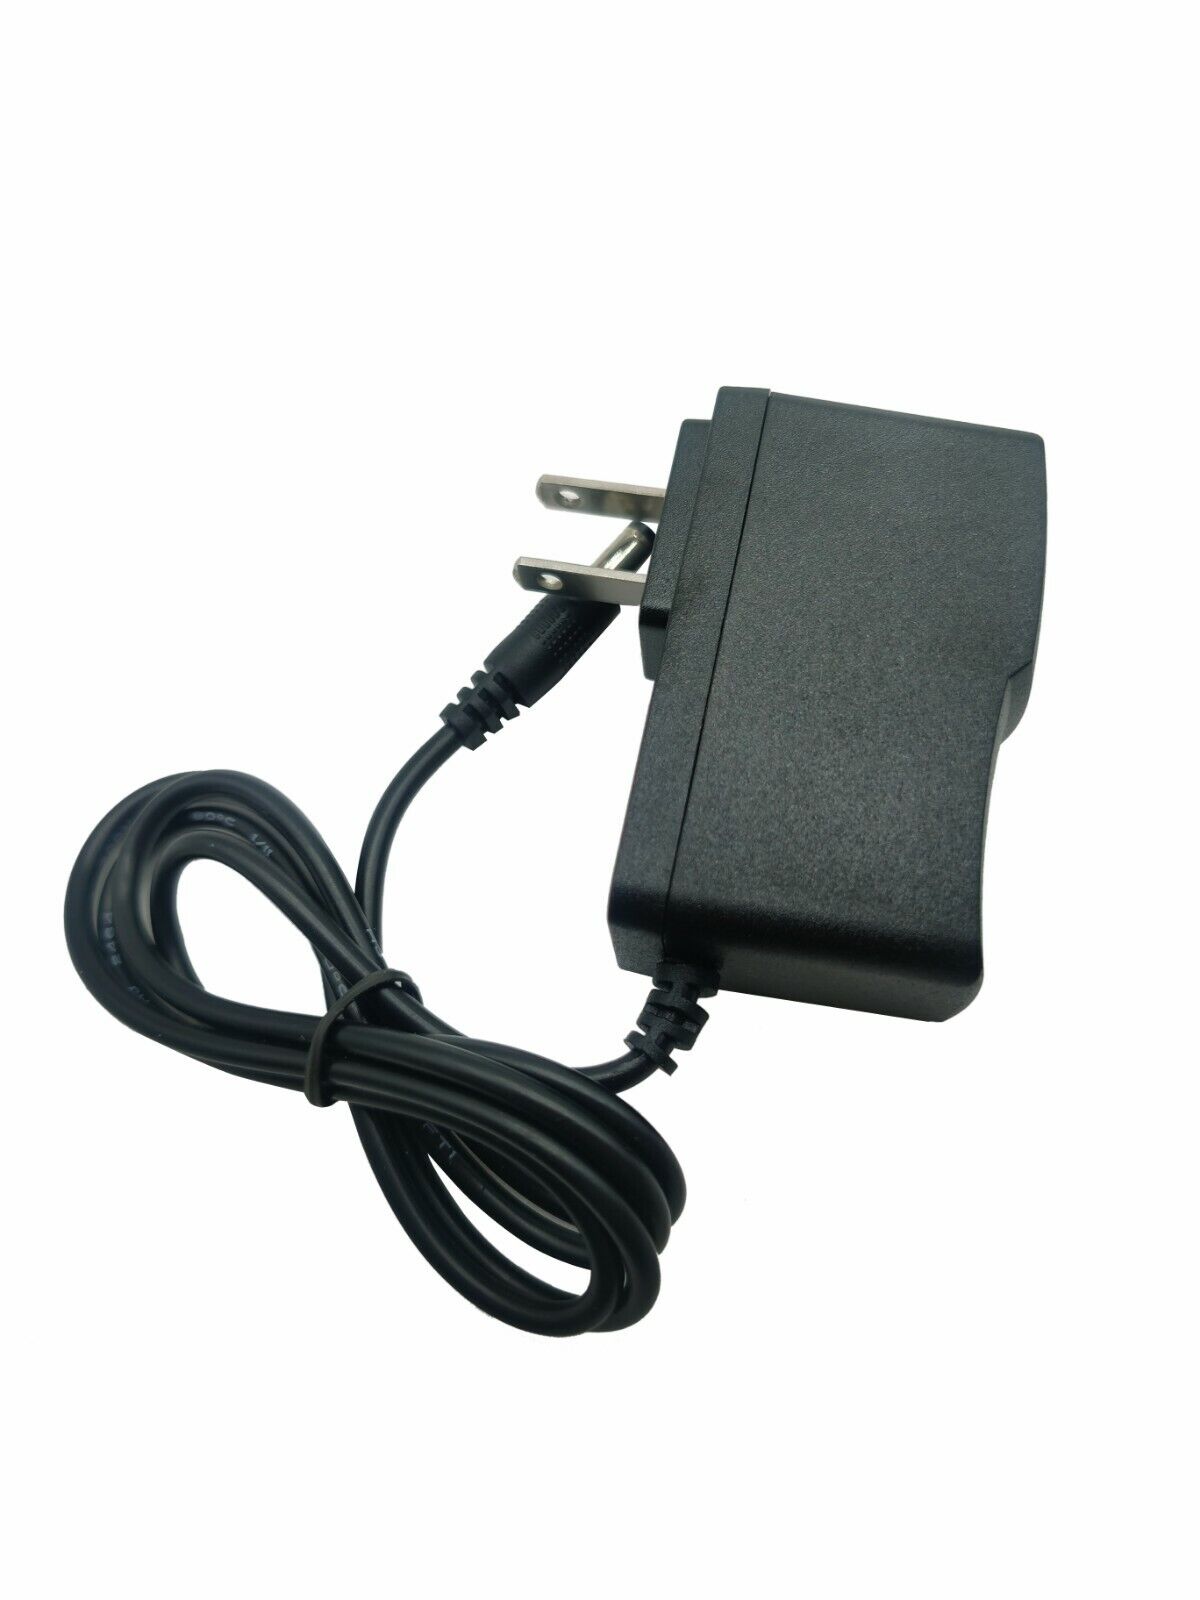 AC/DC Adapter Charger Power For Hoover Rogue Robot 970 Robotic Vacuum Cleaner Connection Split/Duplication: 1:2 Type